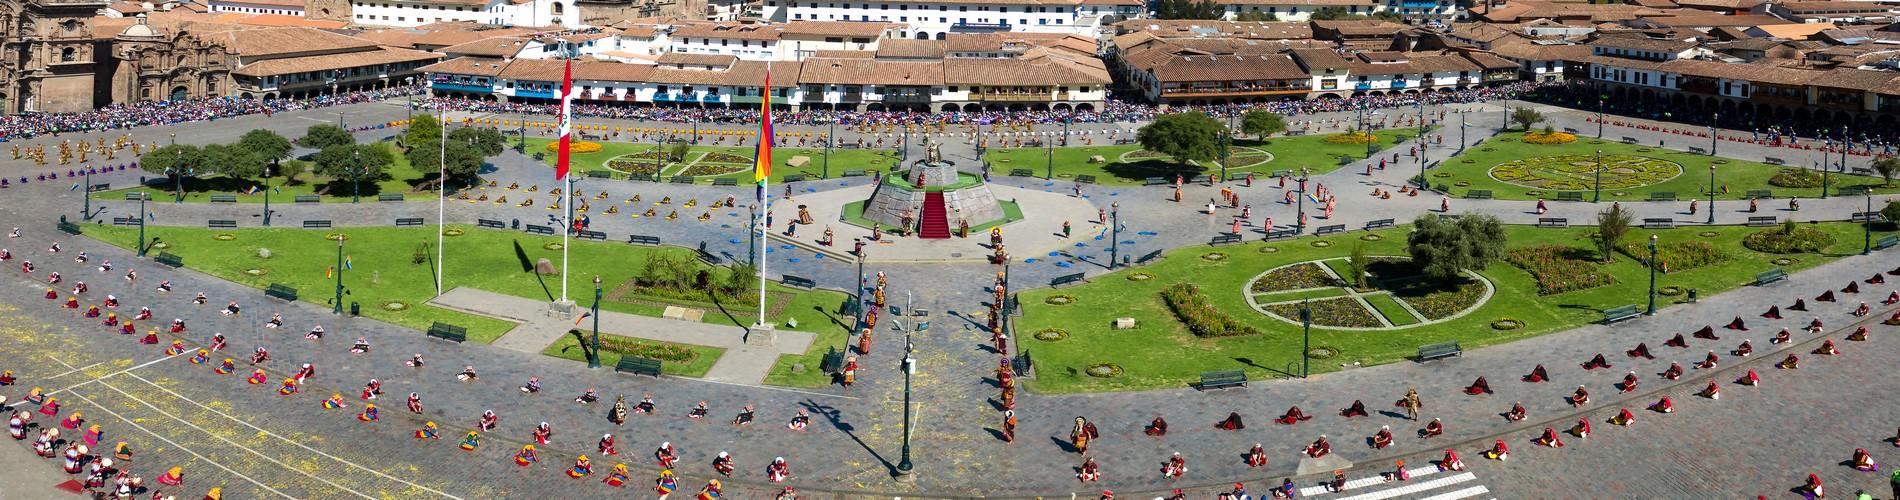 Celebrating the Festivities of Cusco - Culture At Its Best!